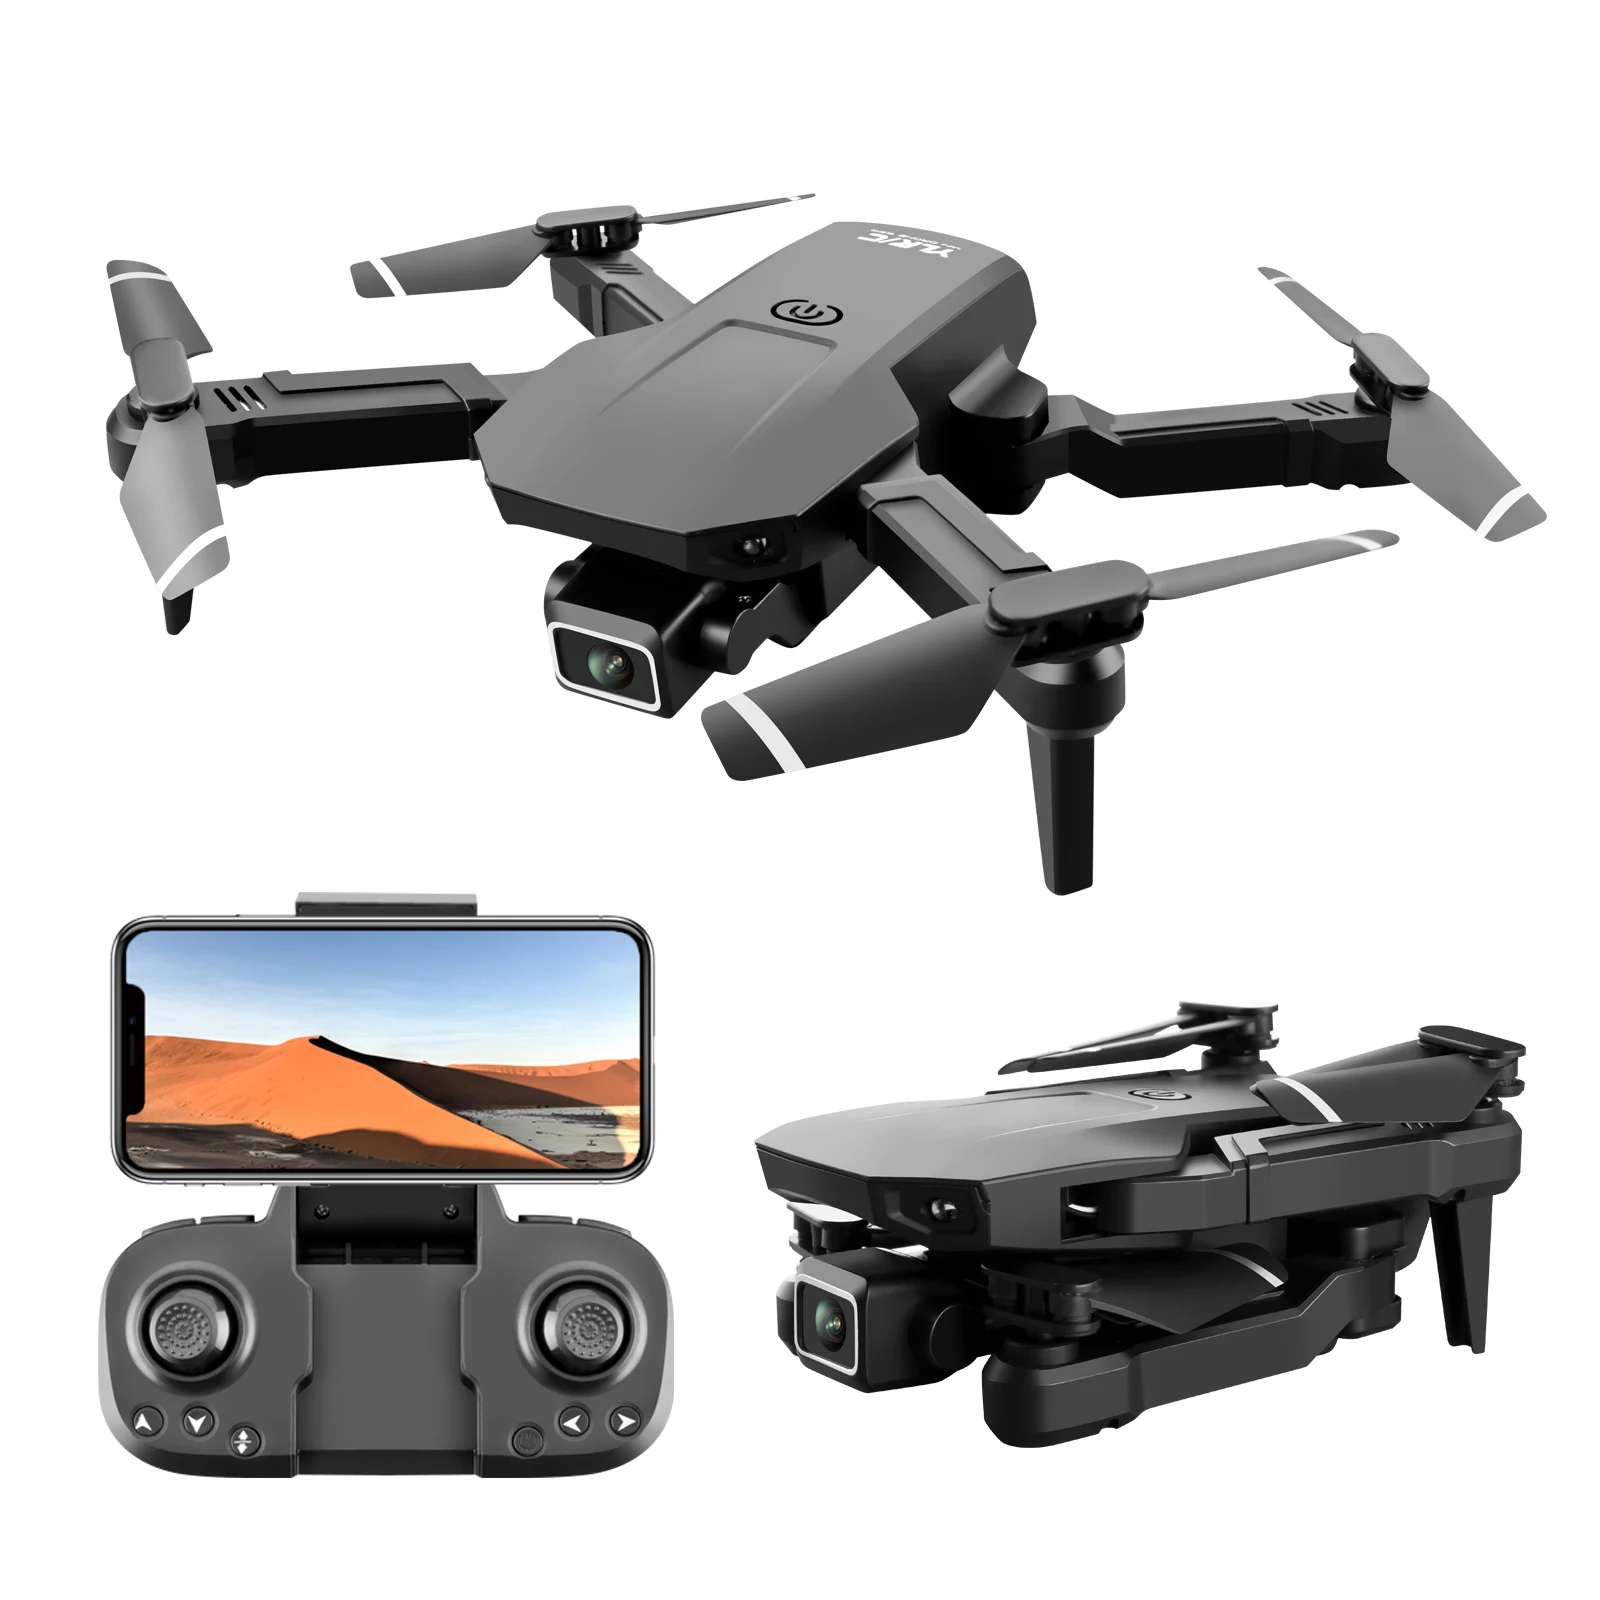 2021 New S68 Pro Mini Drone 4K HD Dual Camera Wide Angle WiFi FPV Drones Quadcopter Height Keep Dron Helicopter Toy VS E88 pro 1